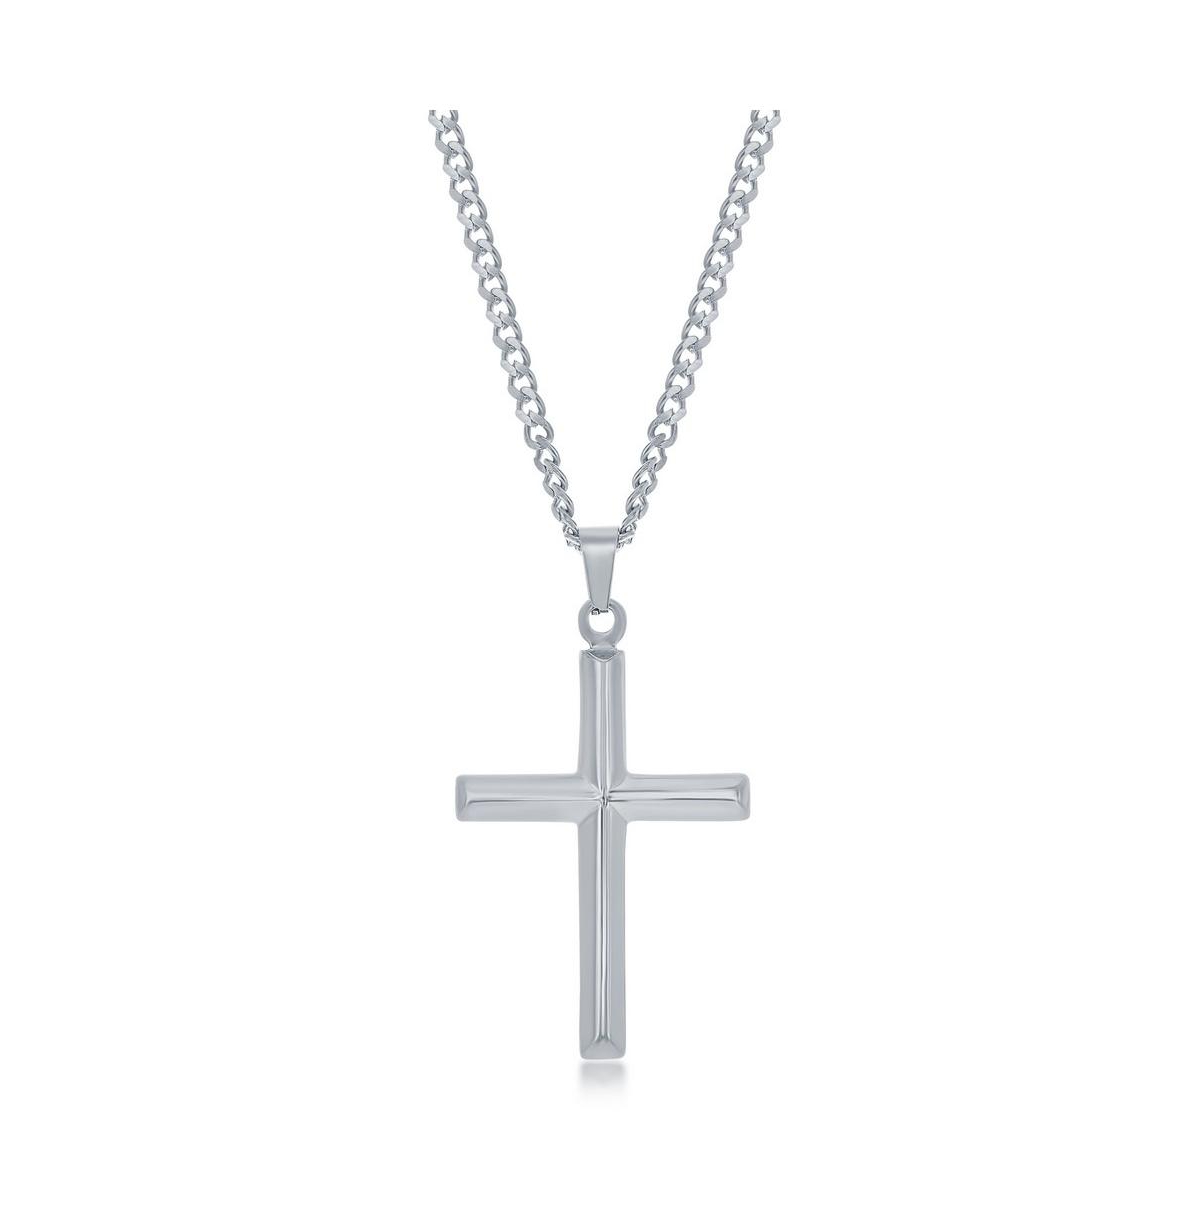 Stainless Steel or Gold Plated over Stainless Steel Polished 3D Cross Necklace - Gold